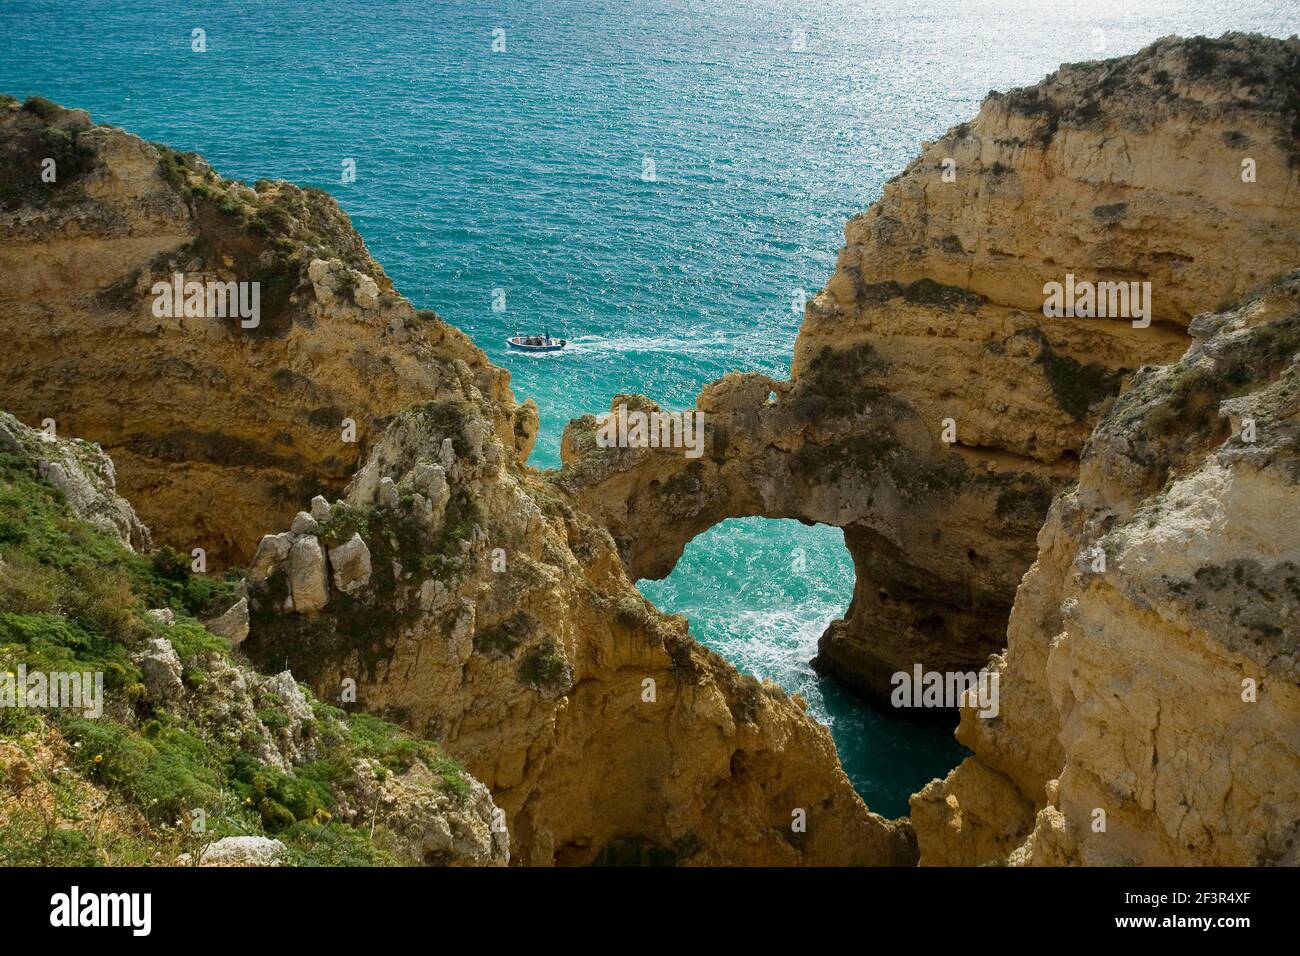 Arched natural rock formation in Ponta da Piedade, Mercy Point, Lagos, Portugal Stock Photo